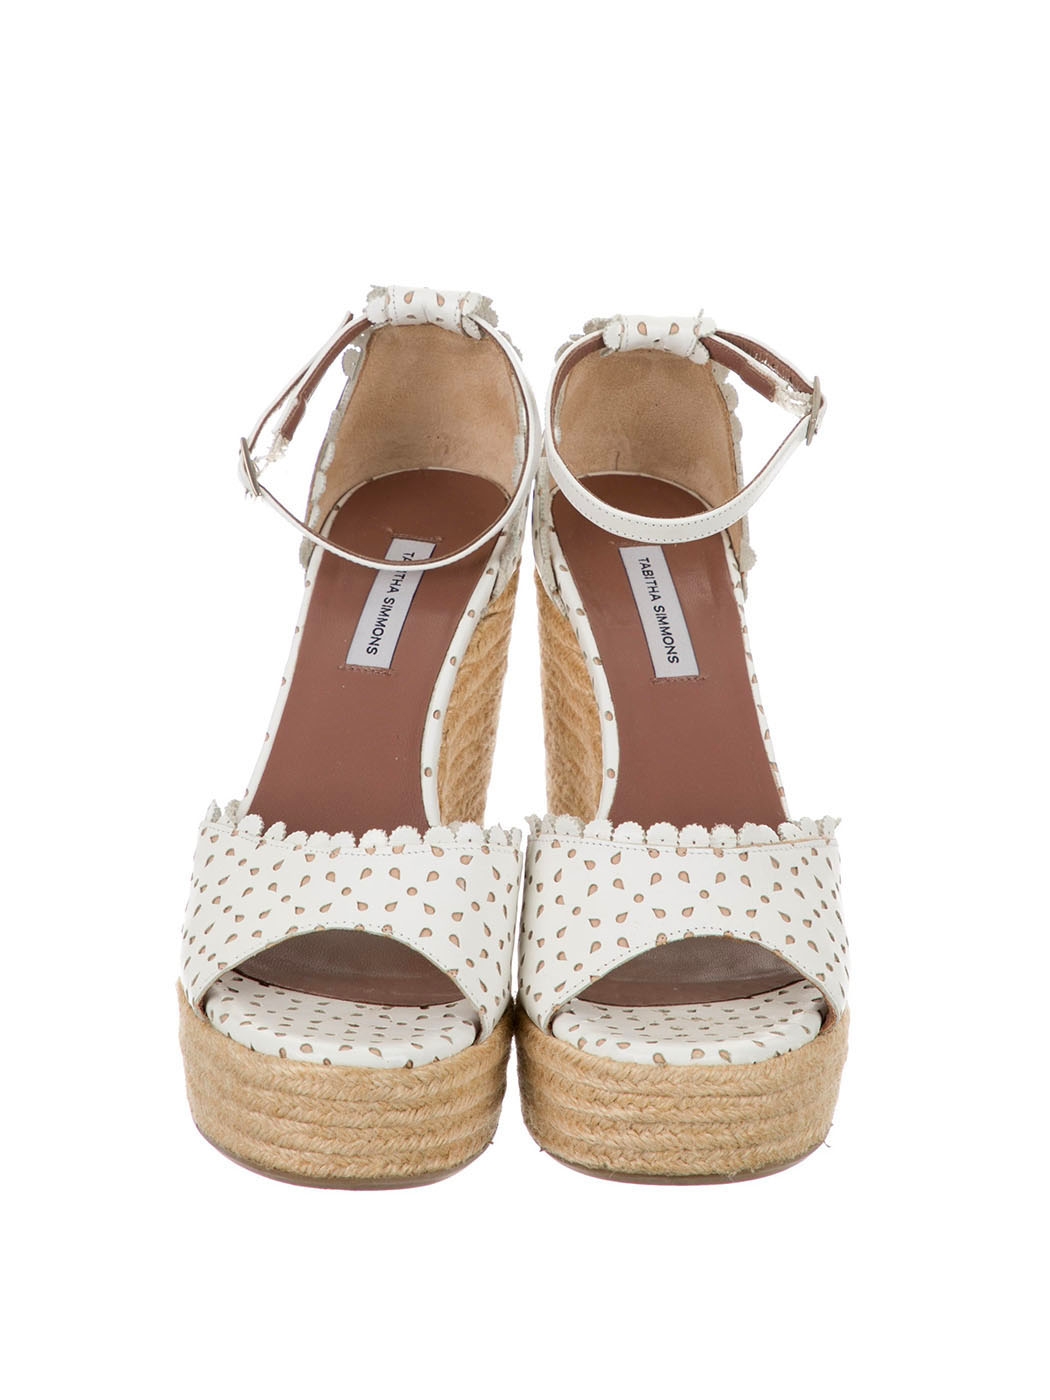 Boutique TABITHA SIMMONS Harp white flower perforated leather wedge ...